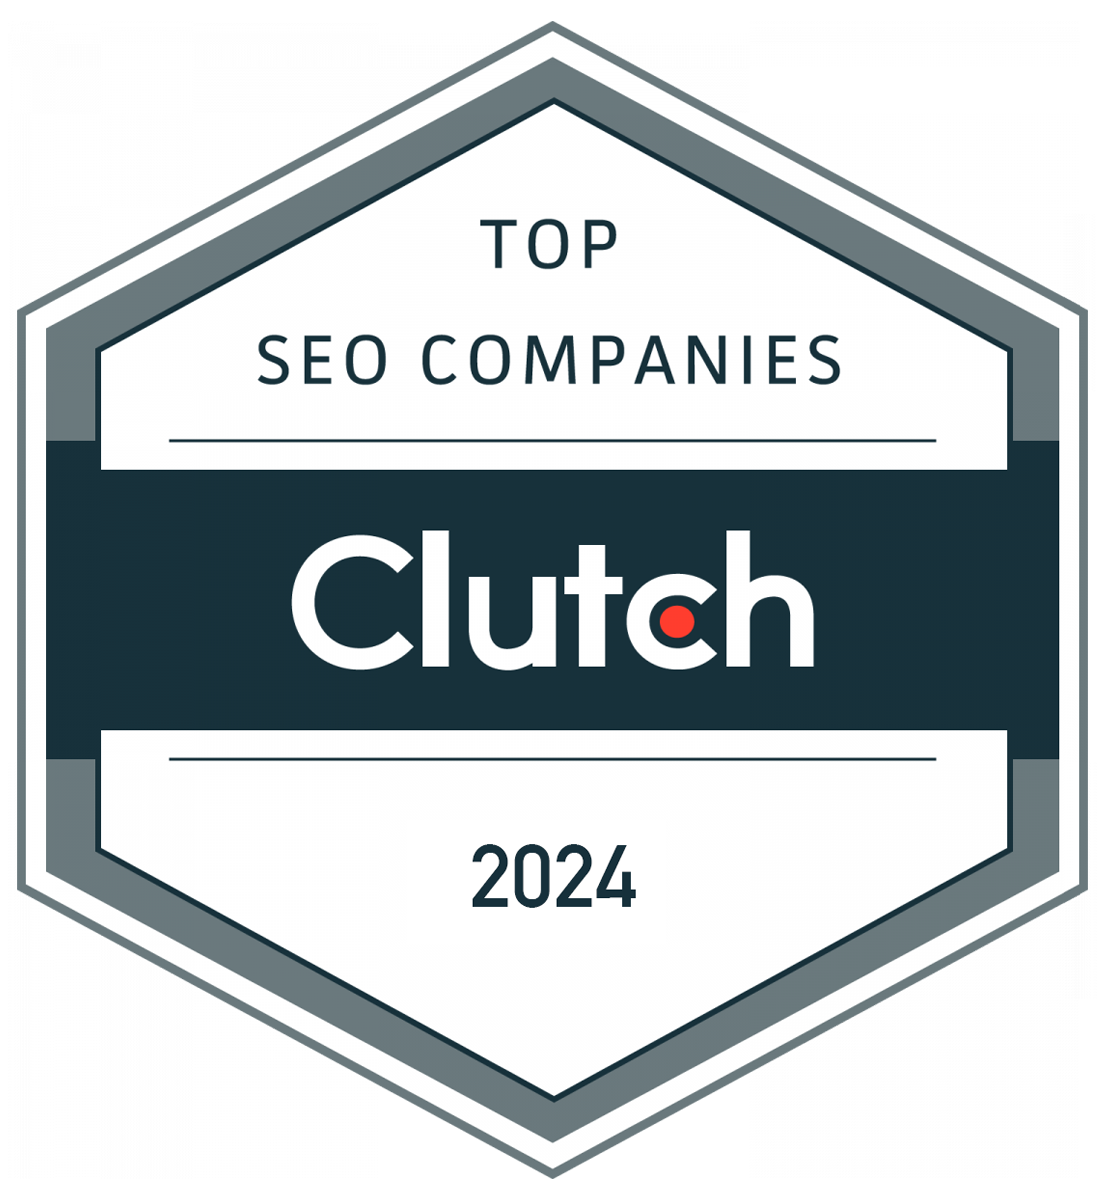 Top-SEO-Companies-2021-by-Clutch-new